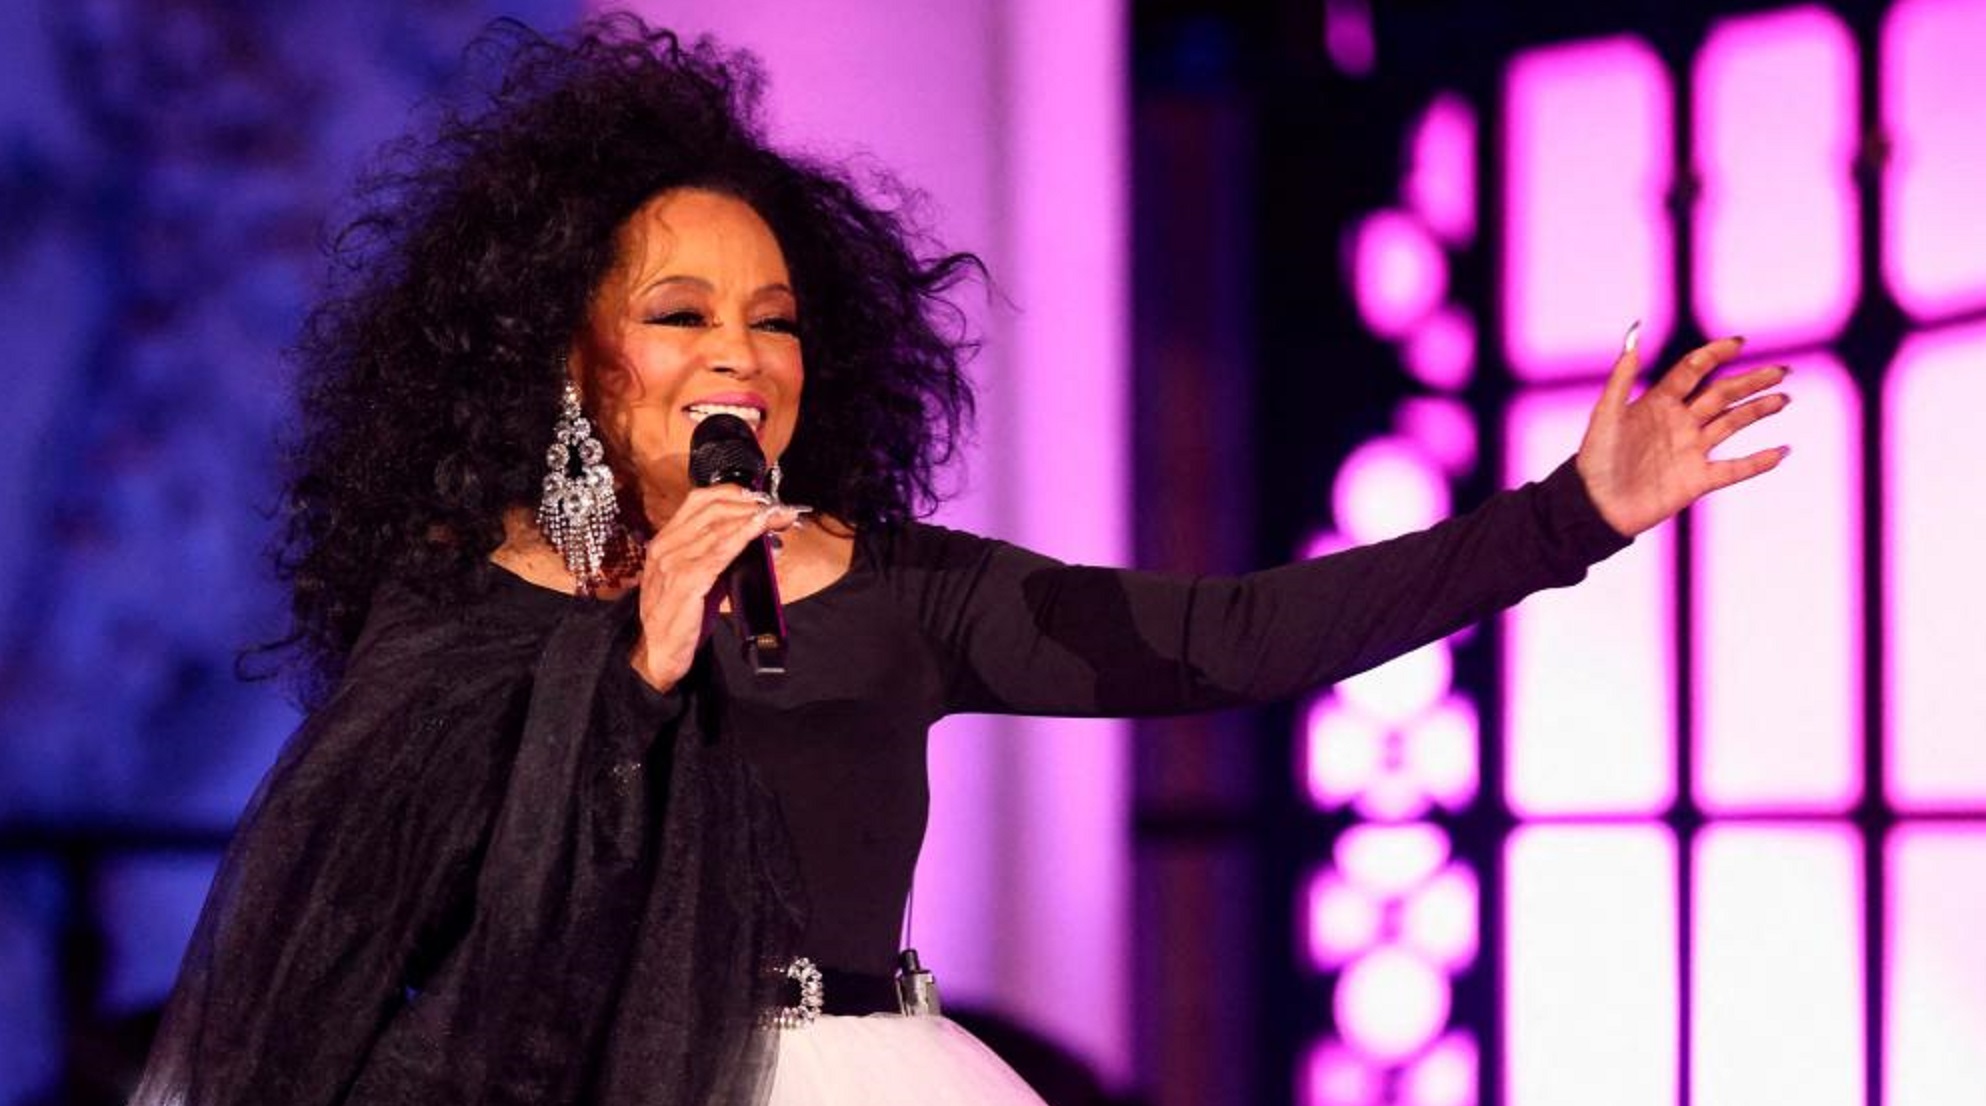 Watch: Legendary Diana Ross Performs ‘Ain’t No Mountain High Enough’ at The Queen’s Platinum Jubilee Celebration In Buckingham Palace